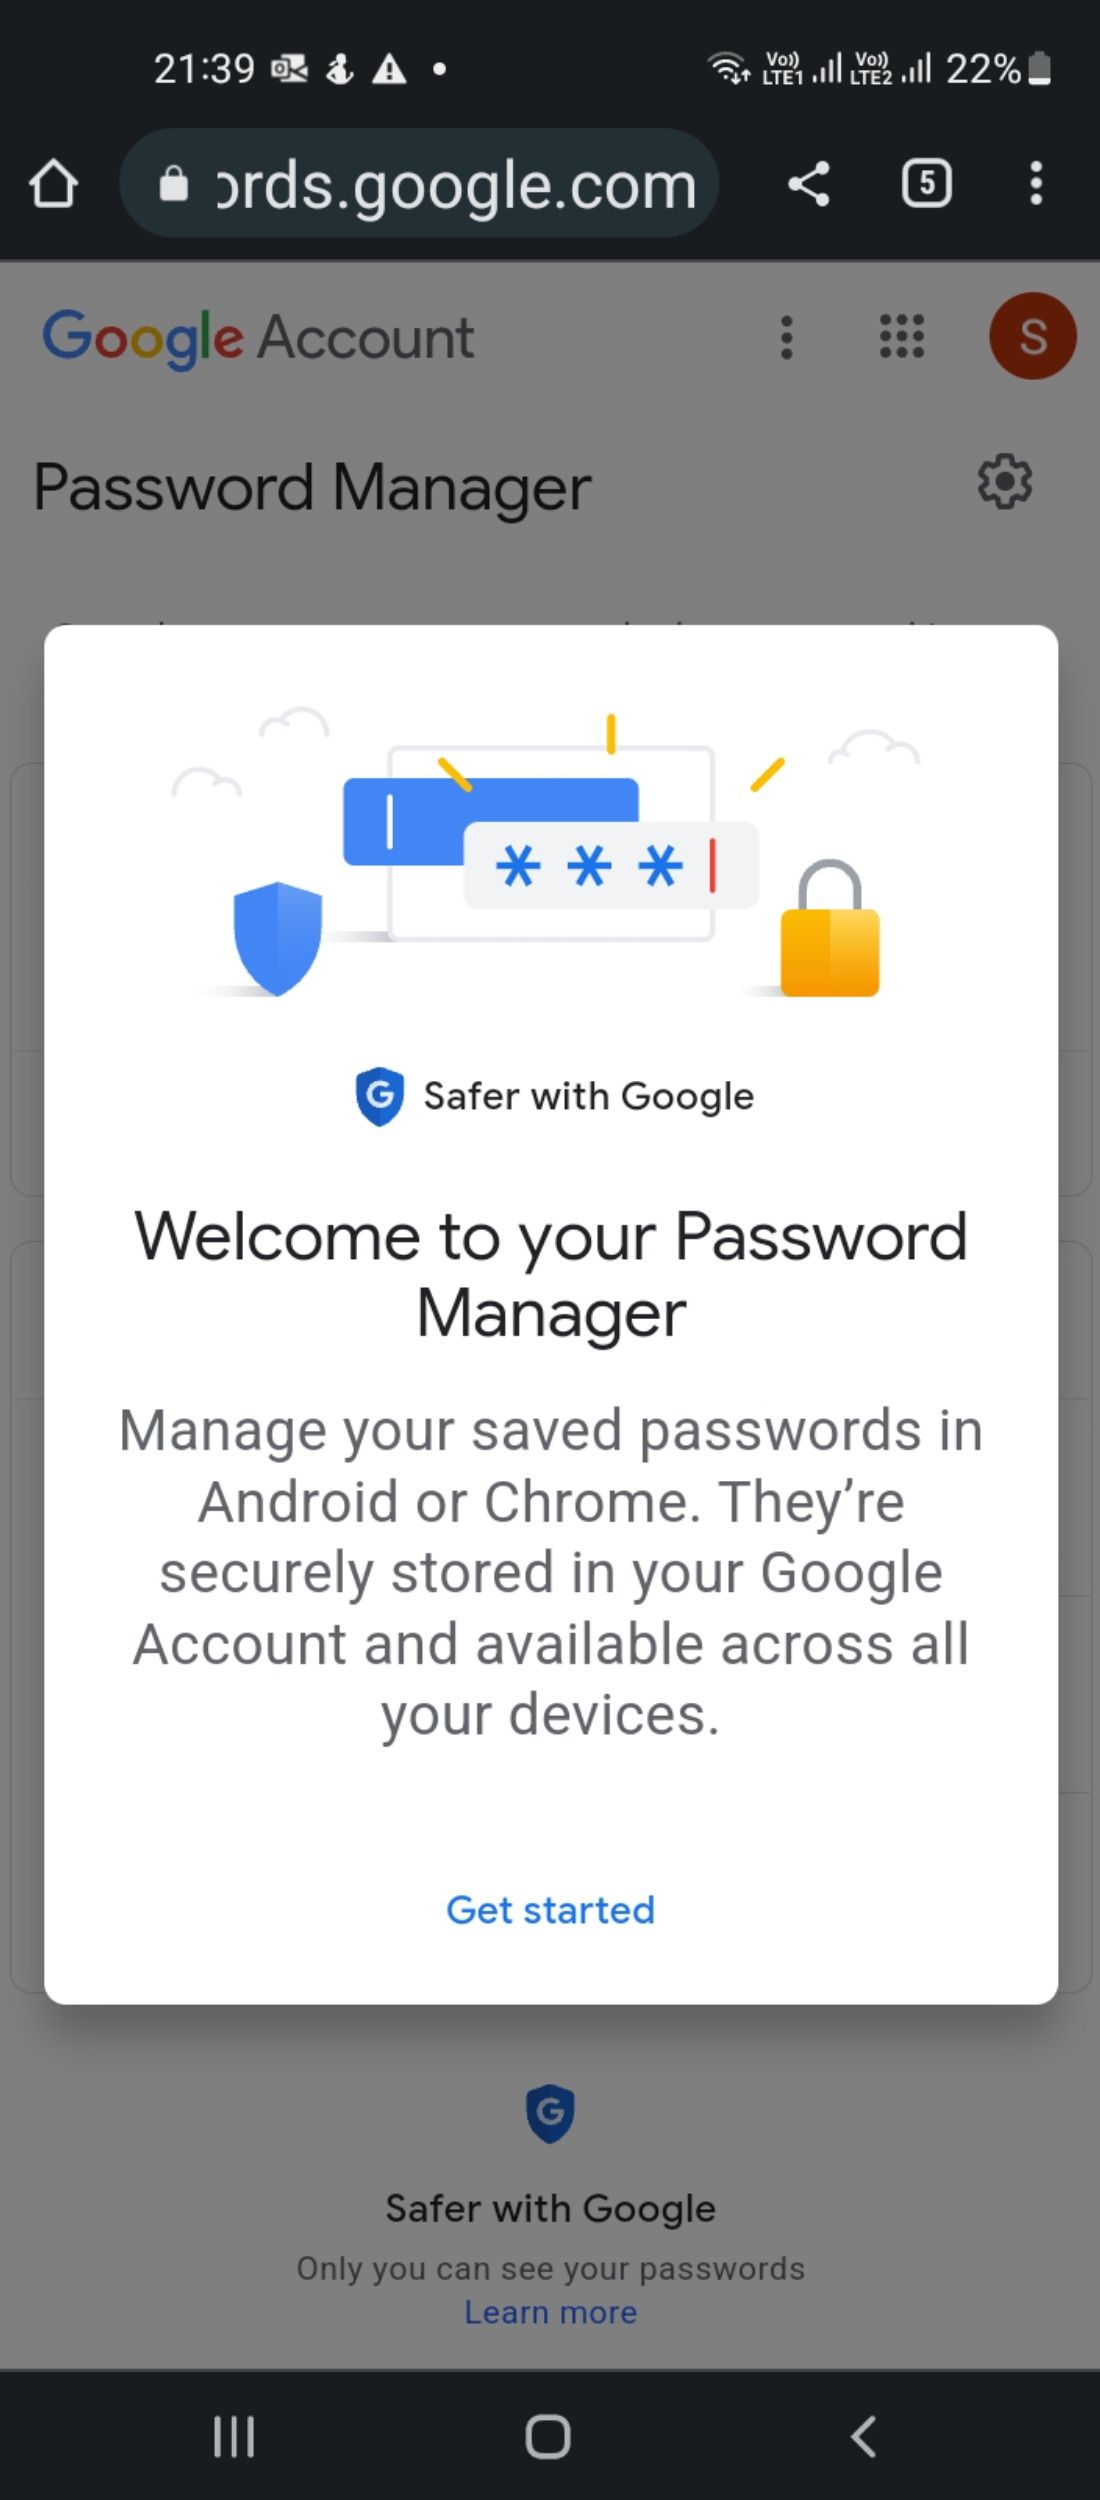 Home screen in Google Password Manager